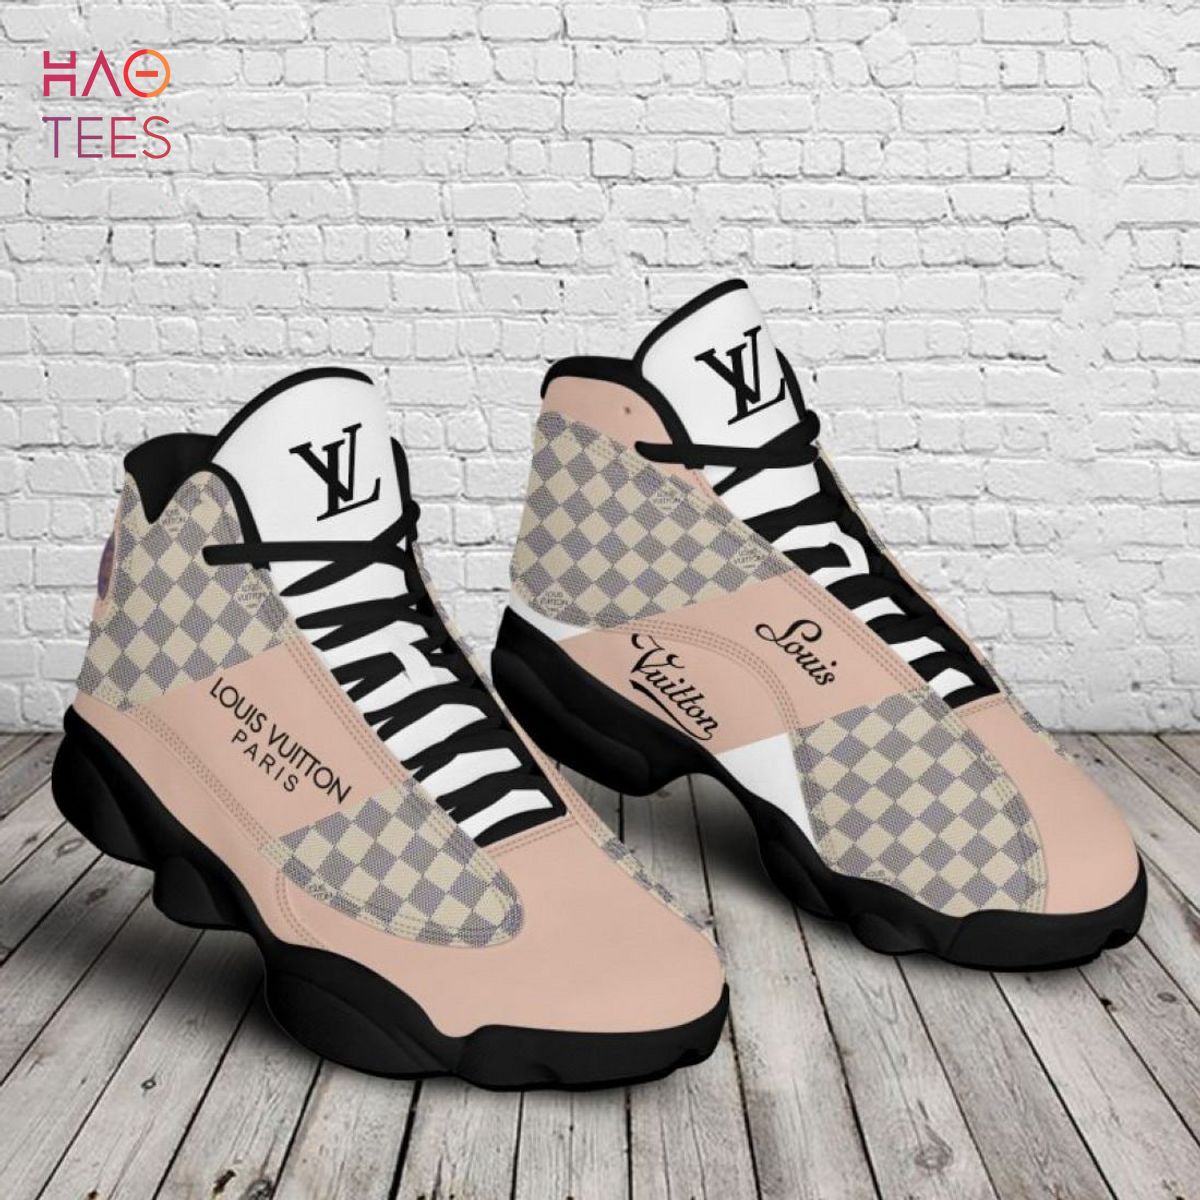 lv shoes pink